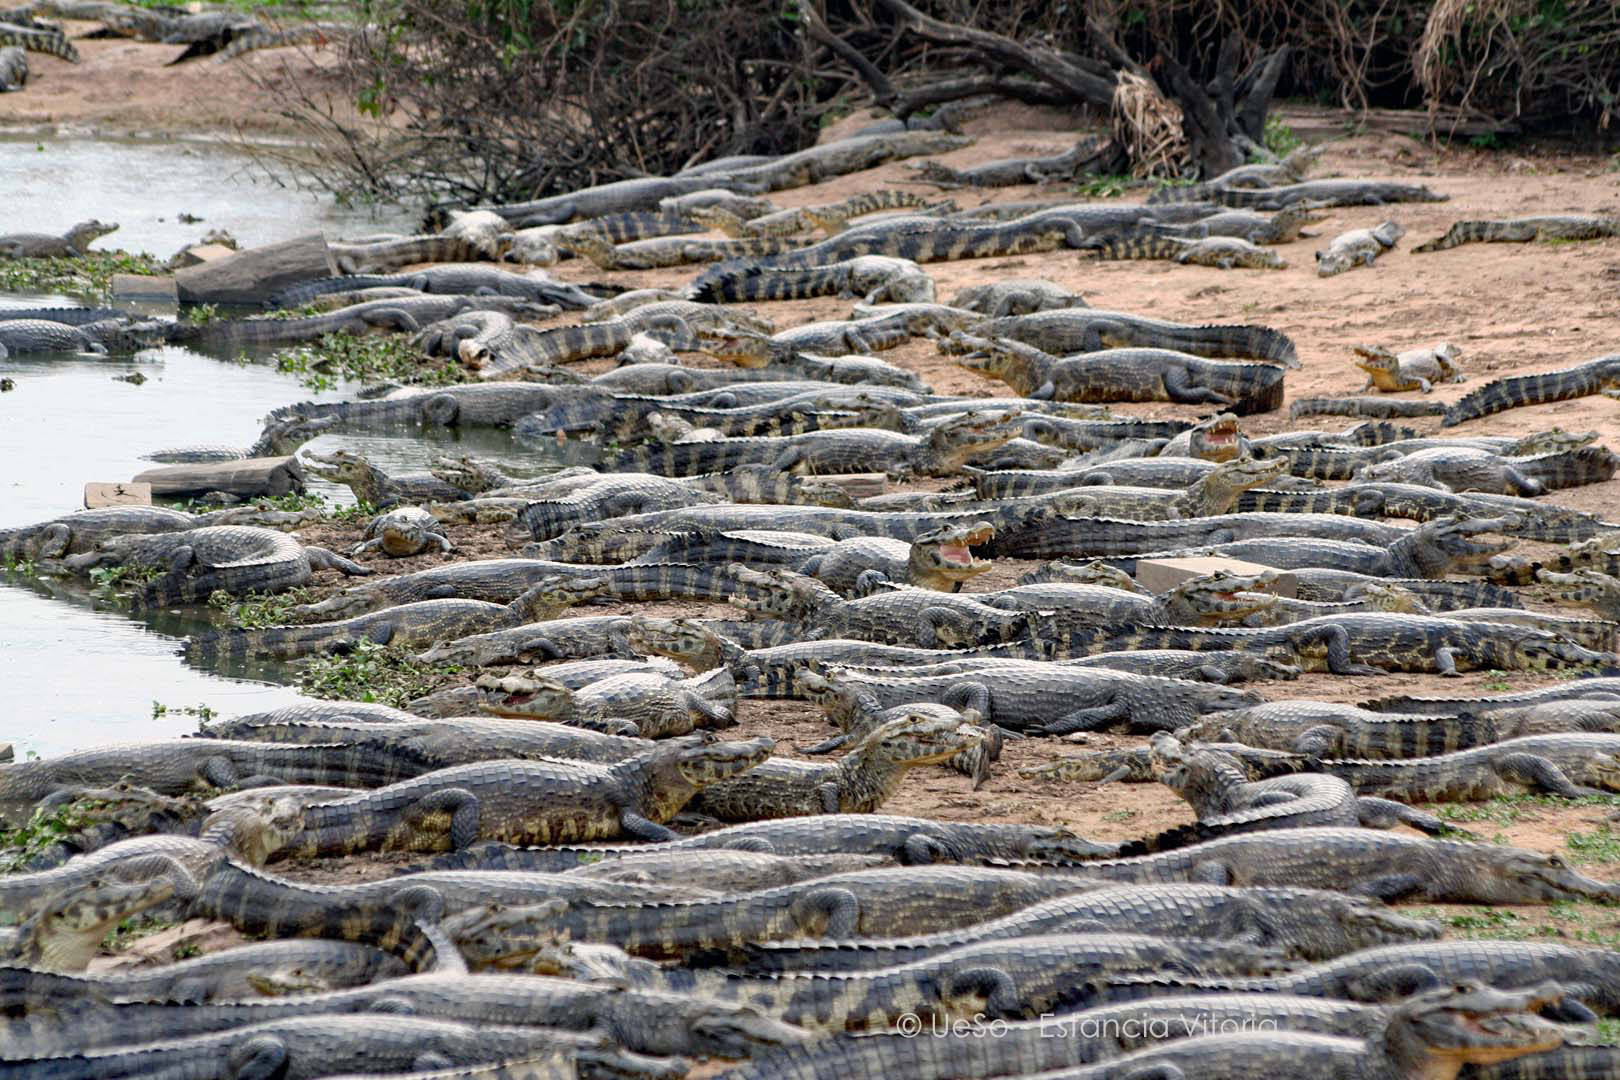 In the dry season, many caimans tumble at the waterholes